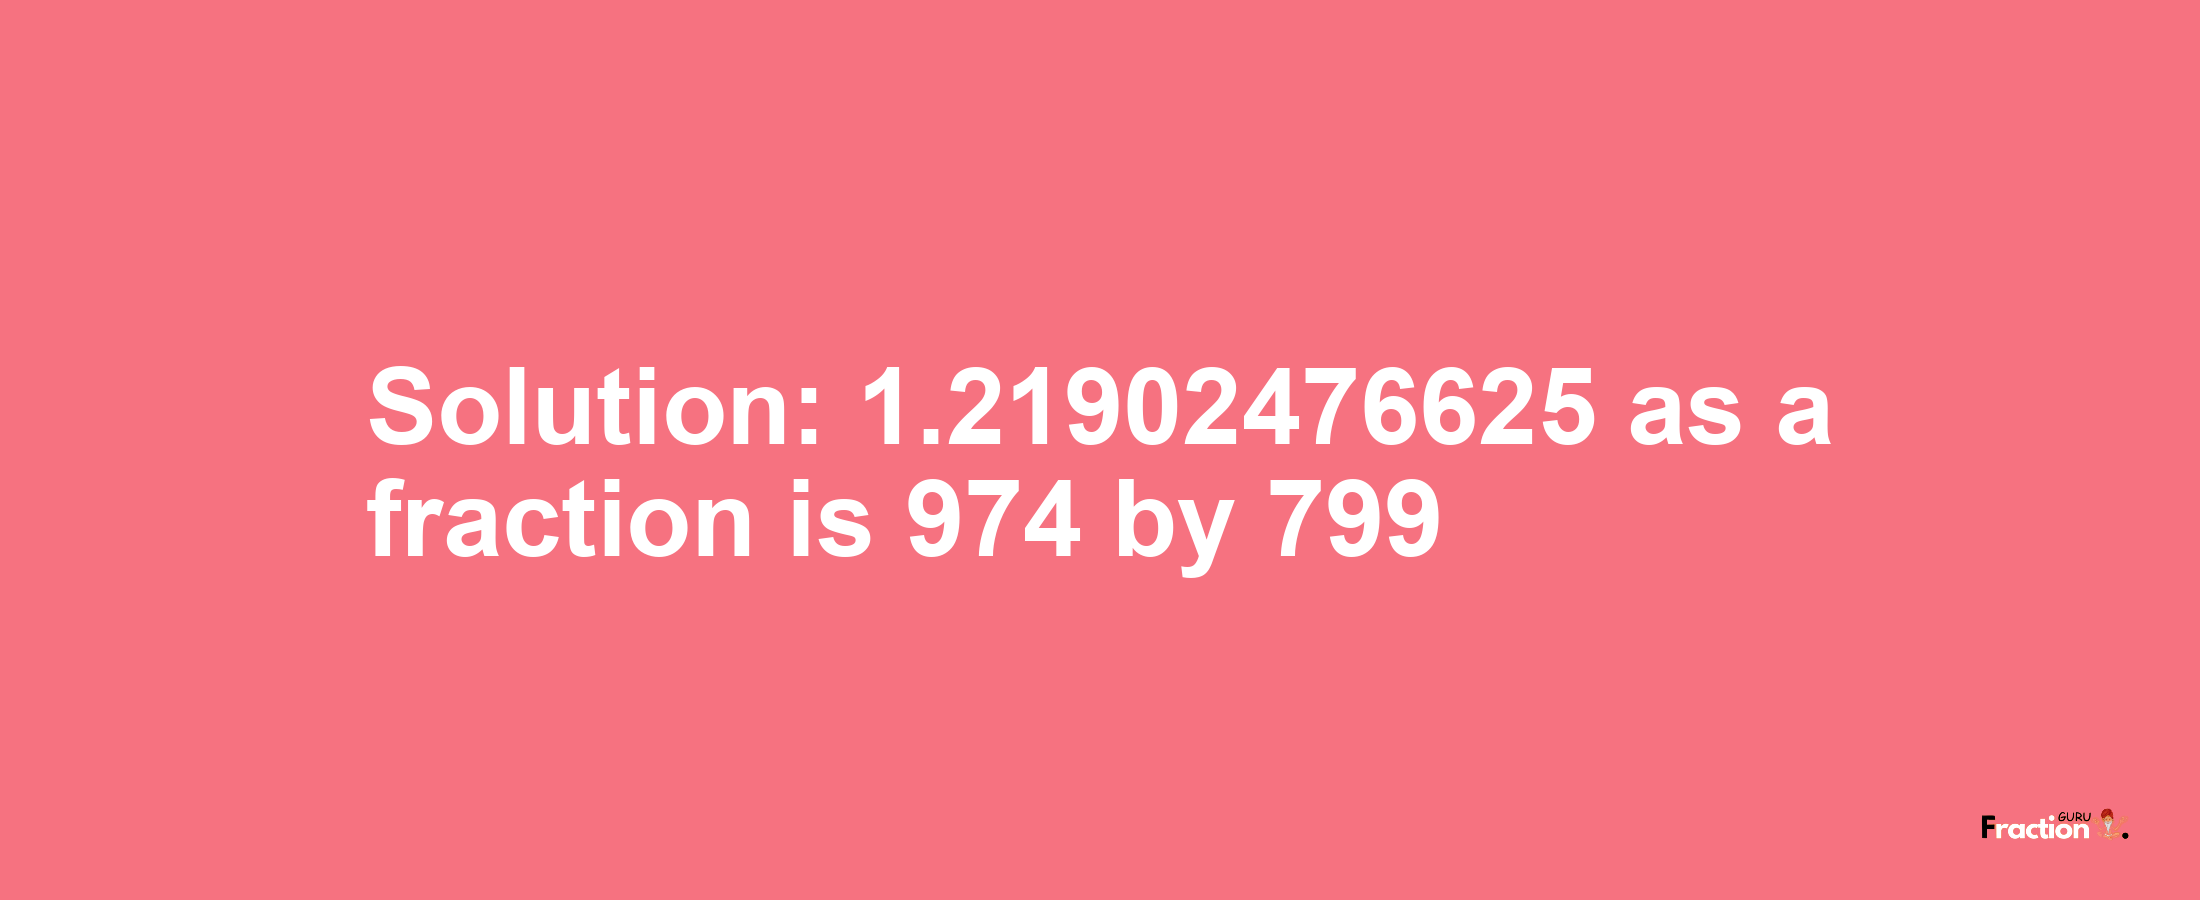 Solution:1.21902476625 as a fraction is 974/799